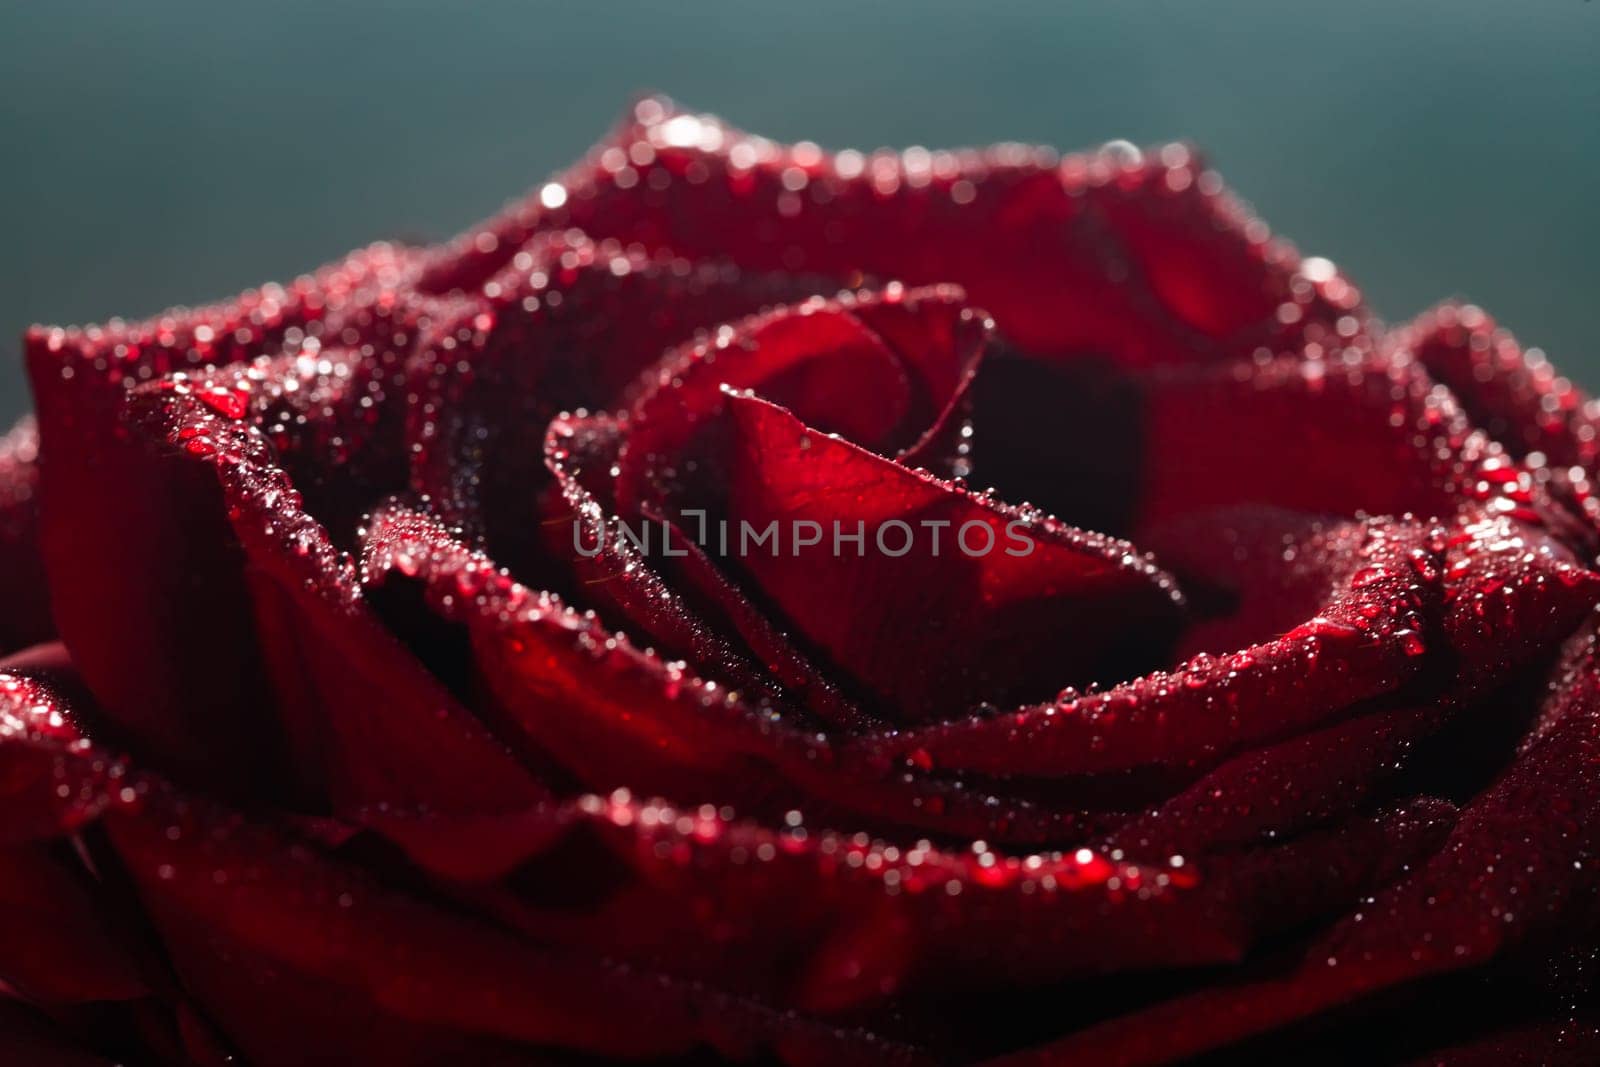 Blooming red rose bud in water drops and mist close-up on a black background, use as background, wallpaper, greeting card